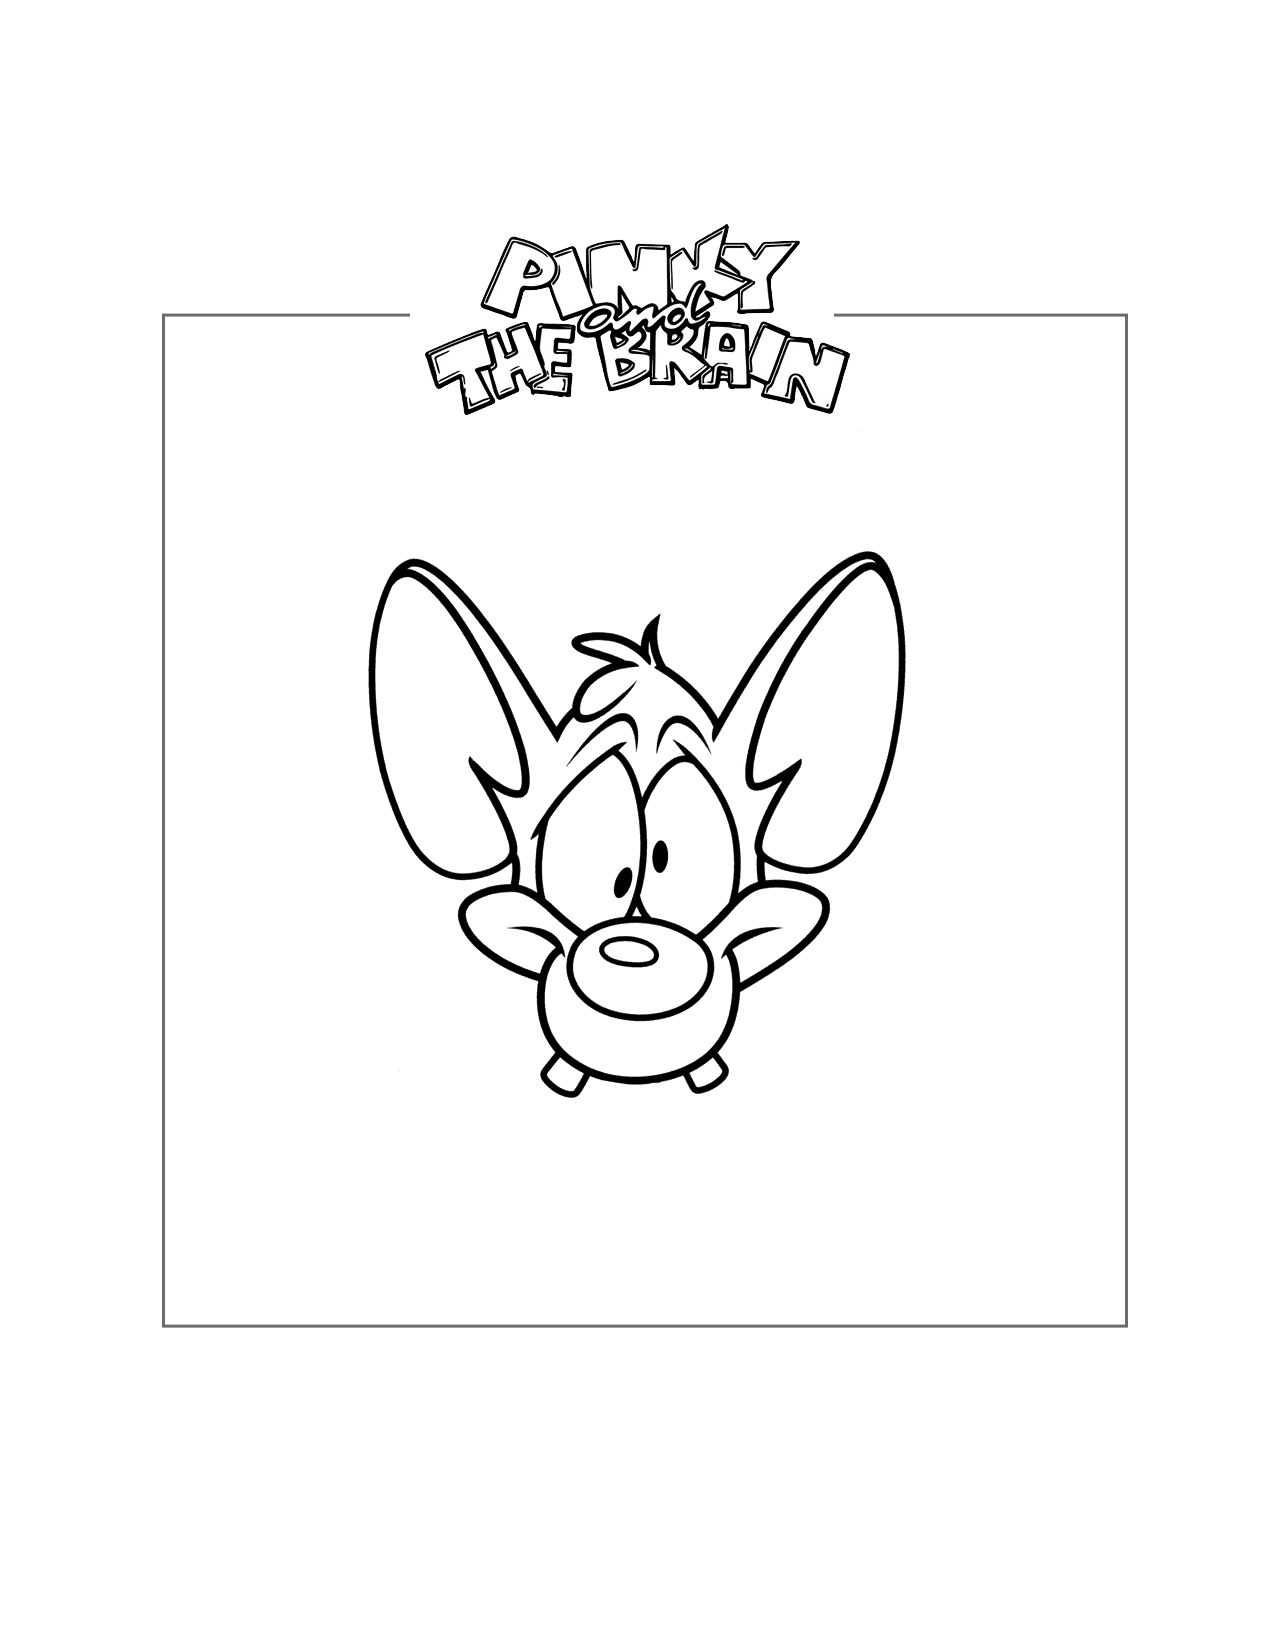 Funny Pinky Head Coloring Page